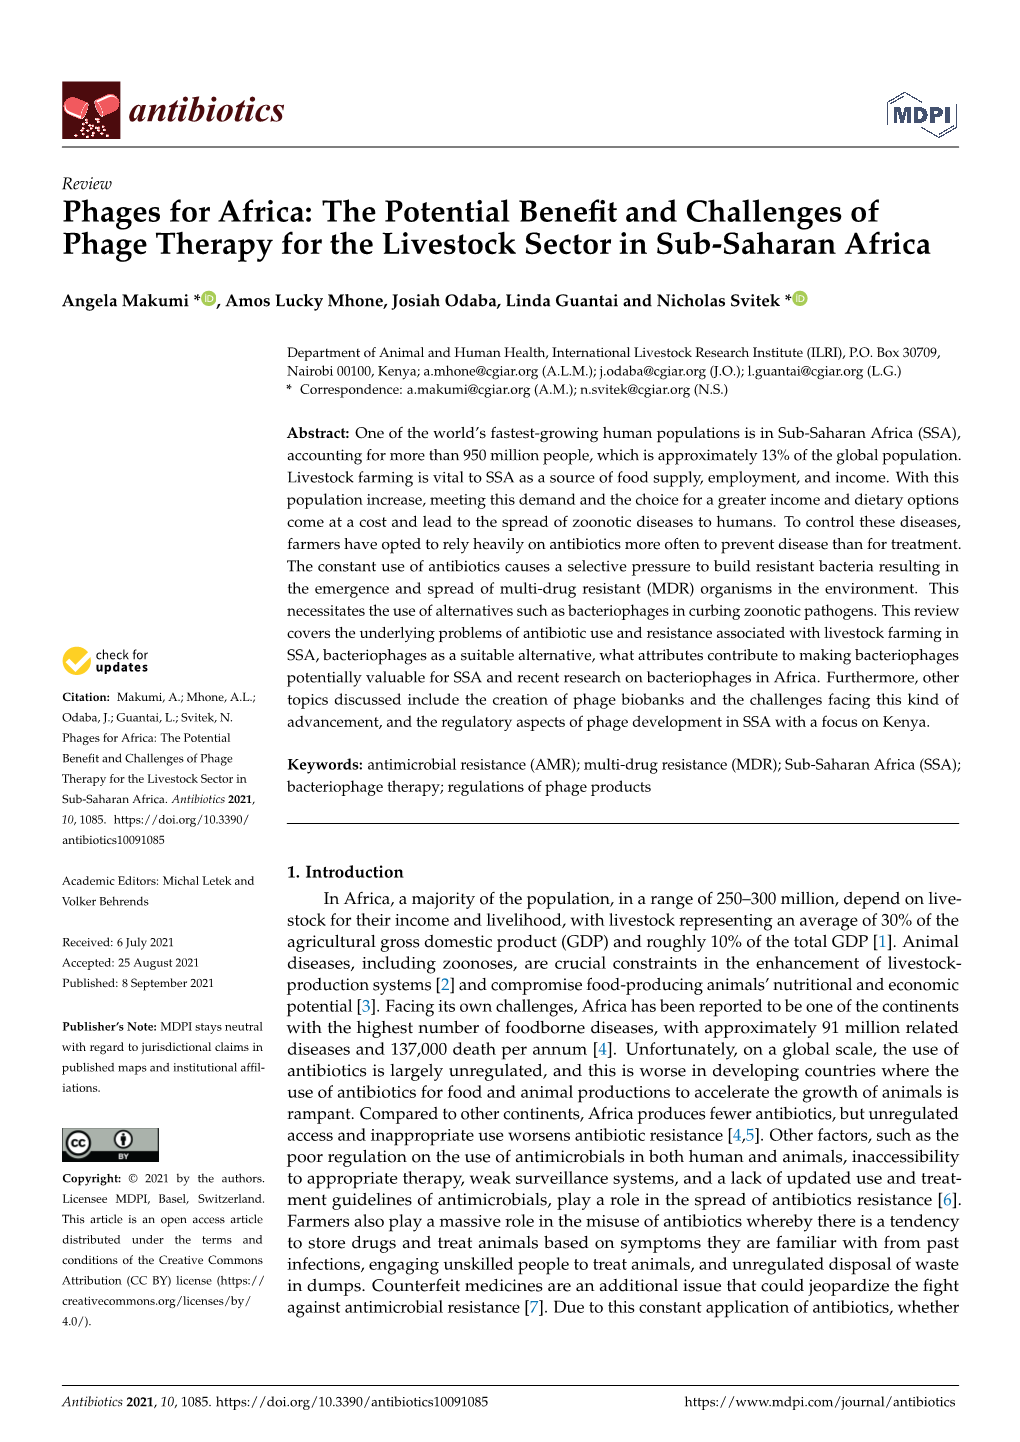 The Potential Benefit and Challenges of Phage Therapy for the Livestock